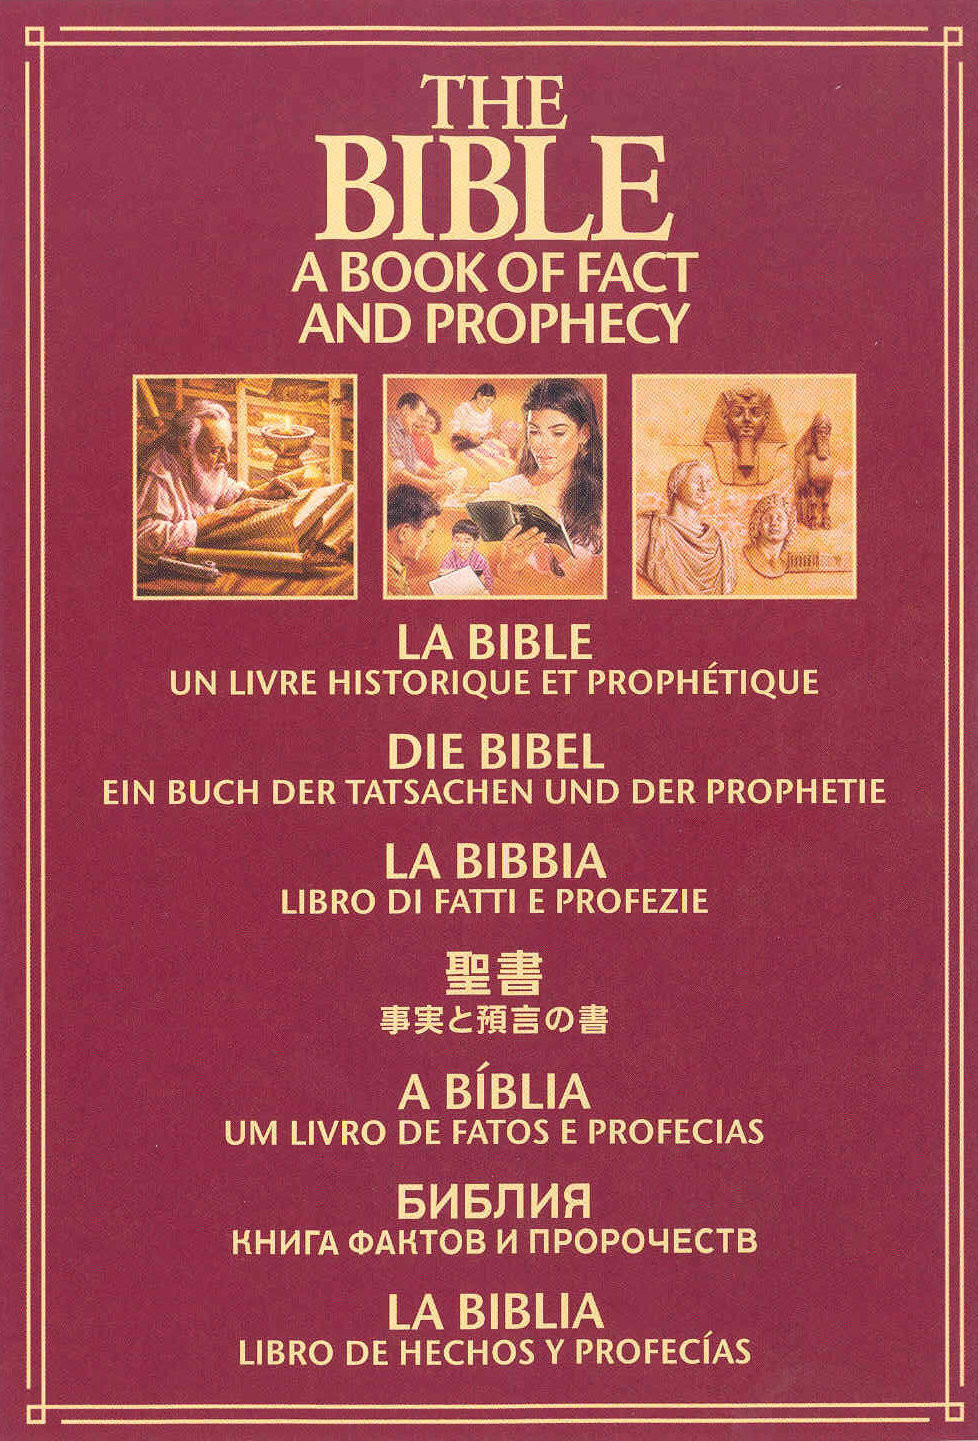 The Bible, a Book of Fact and Prophecy, Volume I: Accurate History, Reliable Prophecy (1993) Screenshot 1